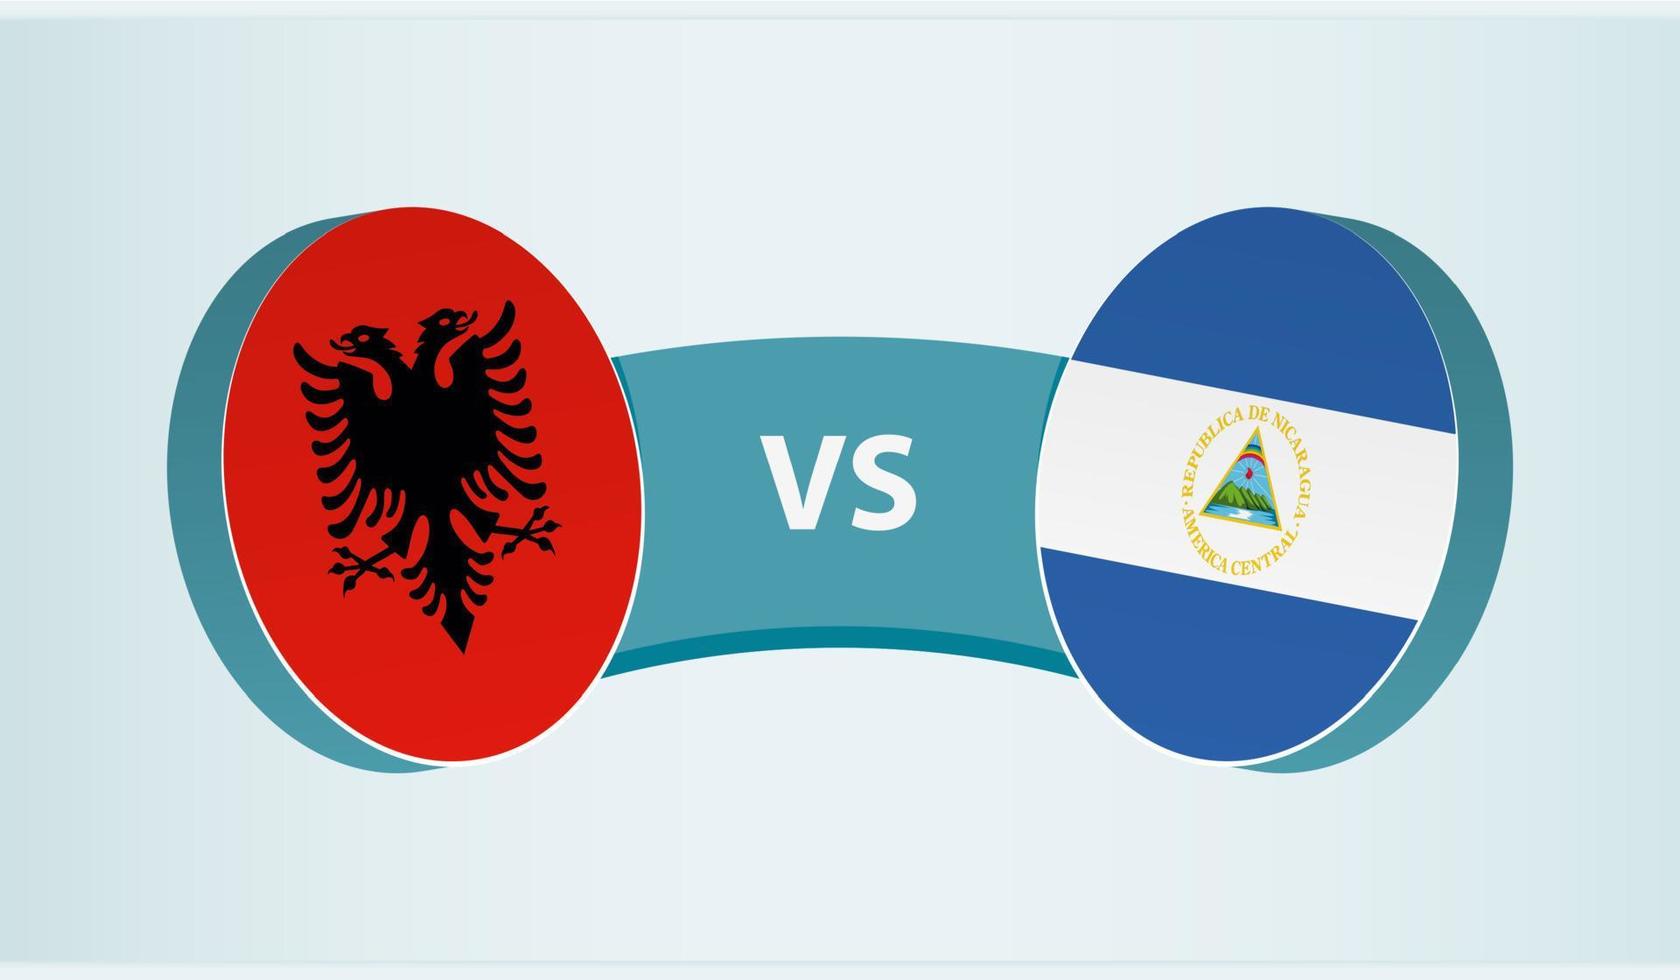 Albania versus Nicaragua, team sports competition concept. vector